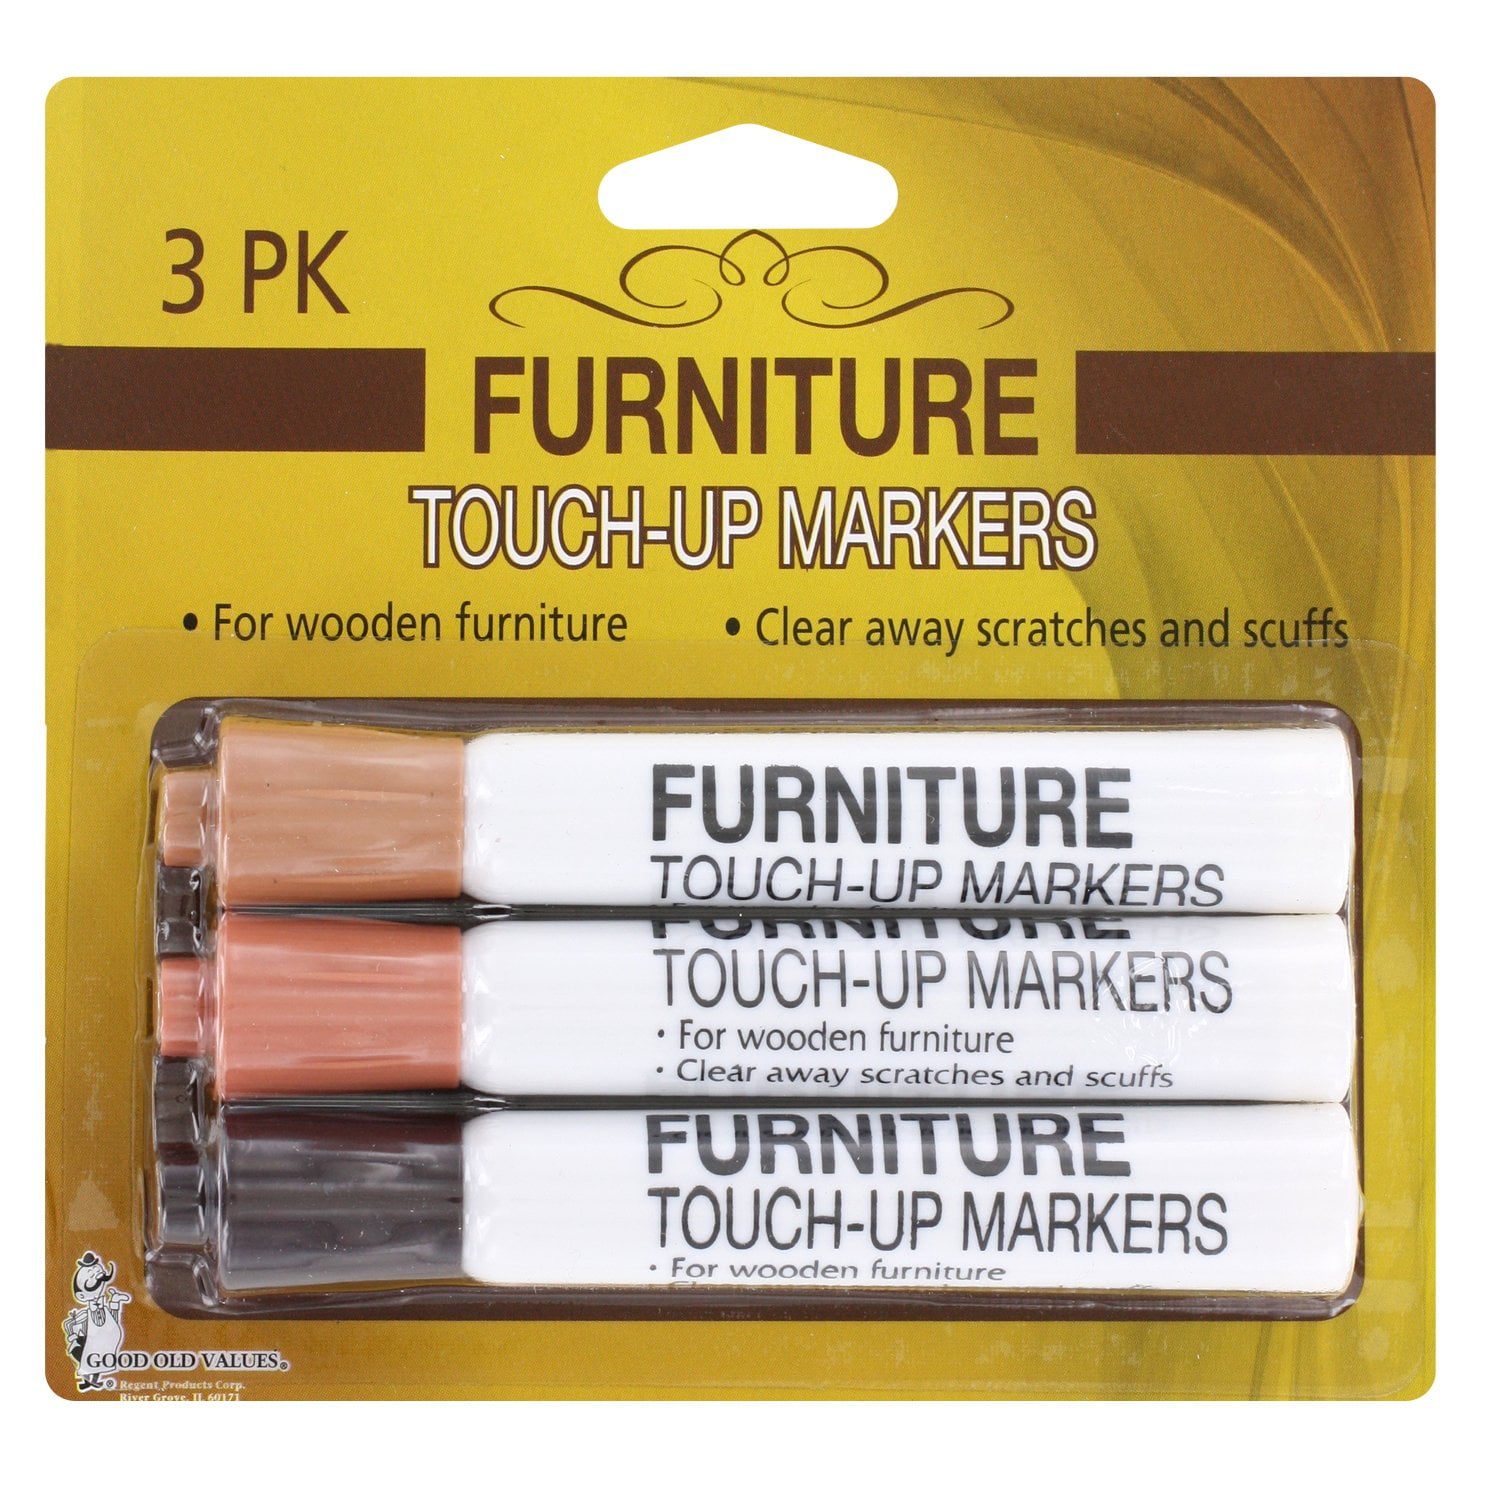 Furniture Markers Touch Up, Wood Scratch and Stain Repair, 8 Felt Tip  Markers, 8 Wax Stick Furniture Crayons & Sharpener, Maple, Oak, Cherry,  Walnut, Mahogany, Black, White and Gray – By RamPro 